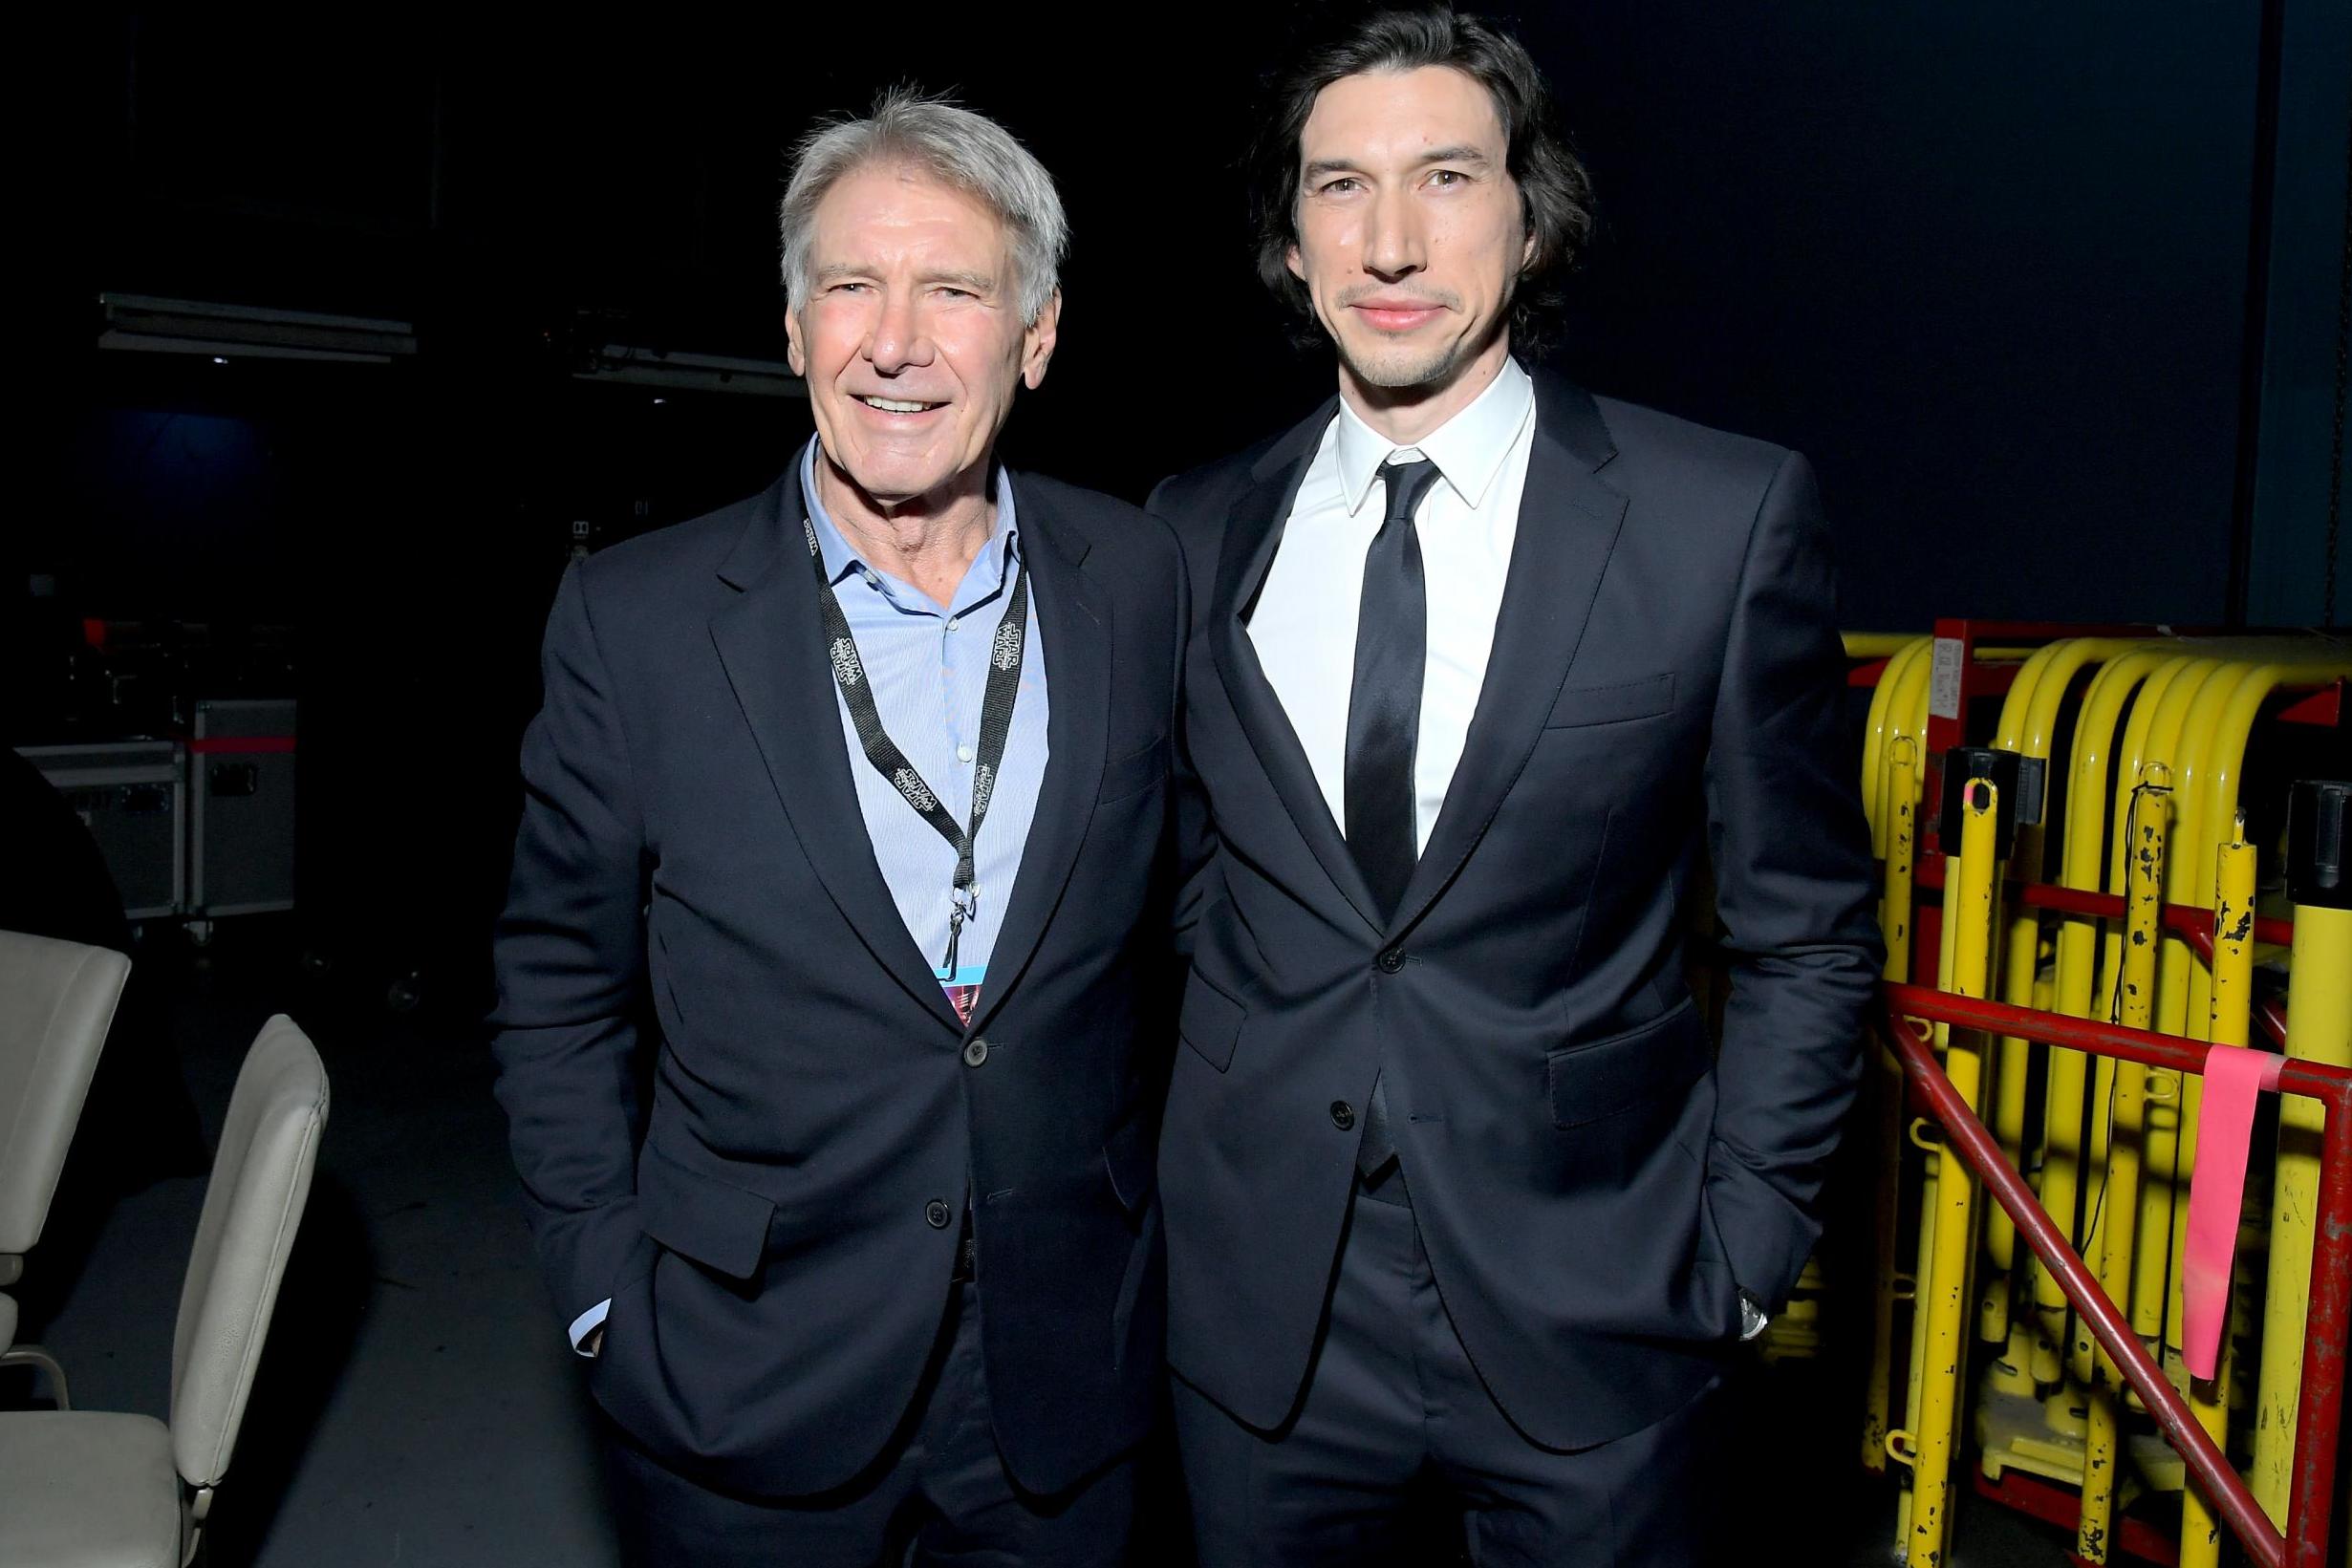 Star Wars: The Rise of Skywalker director JJ Abrams reveals how he convinced Harrison Ford to return to franchise